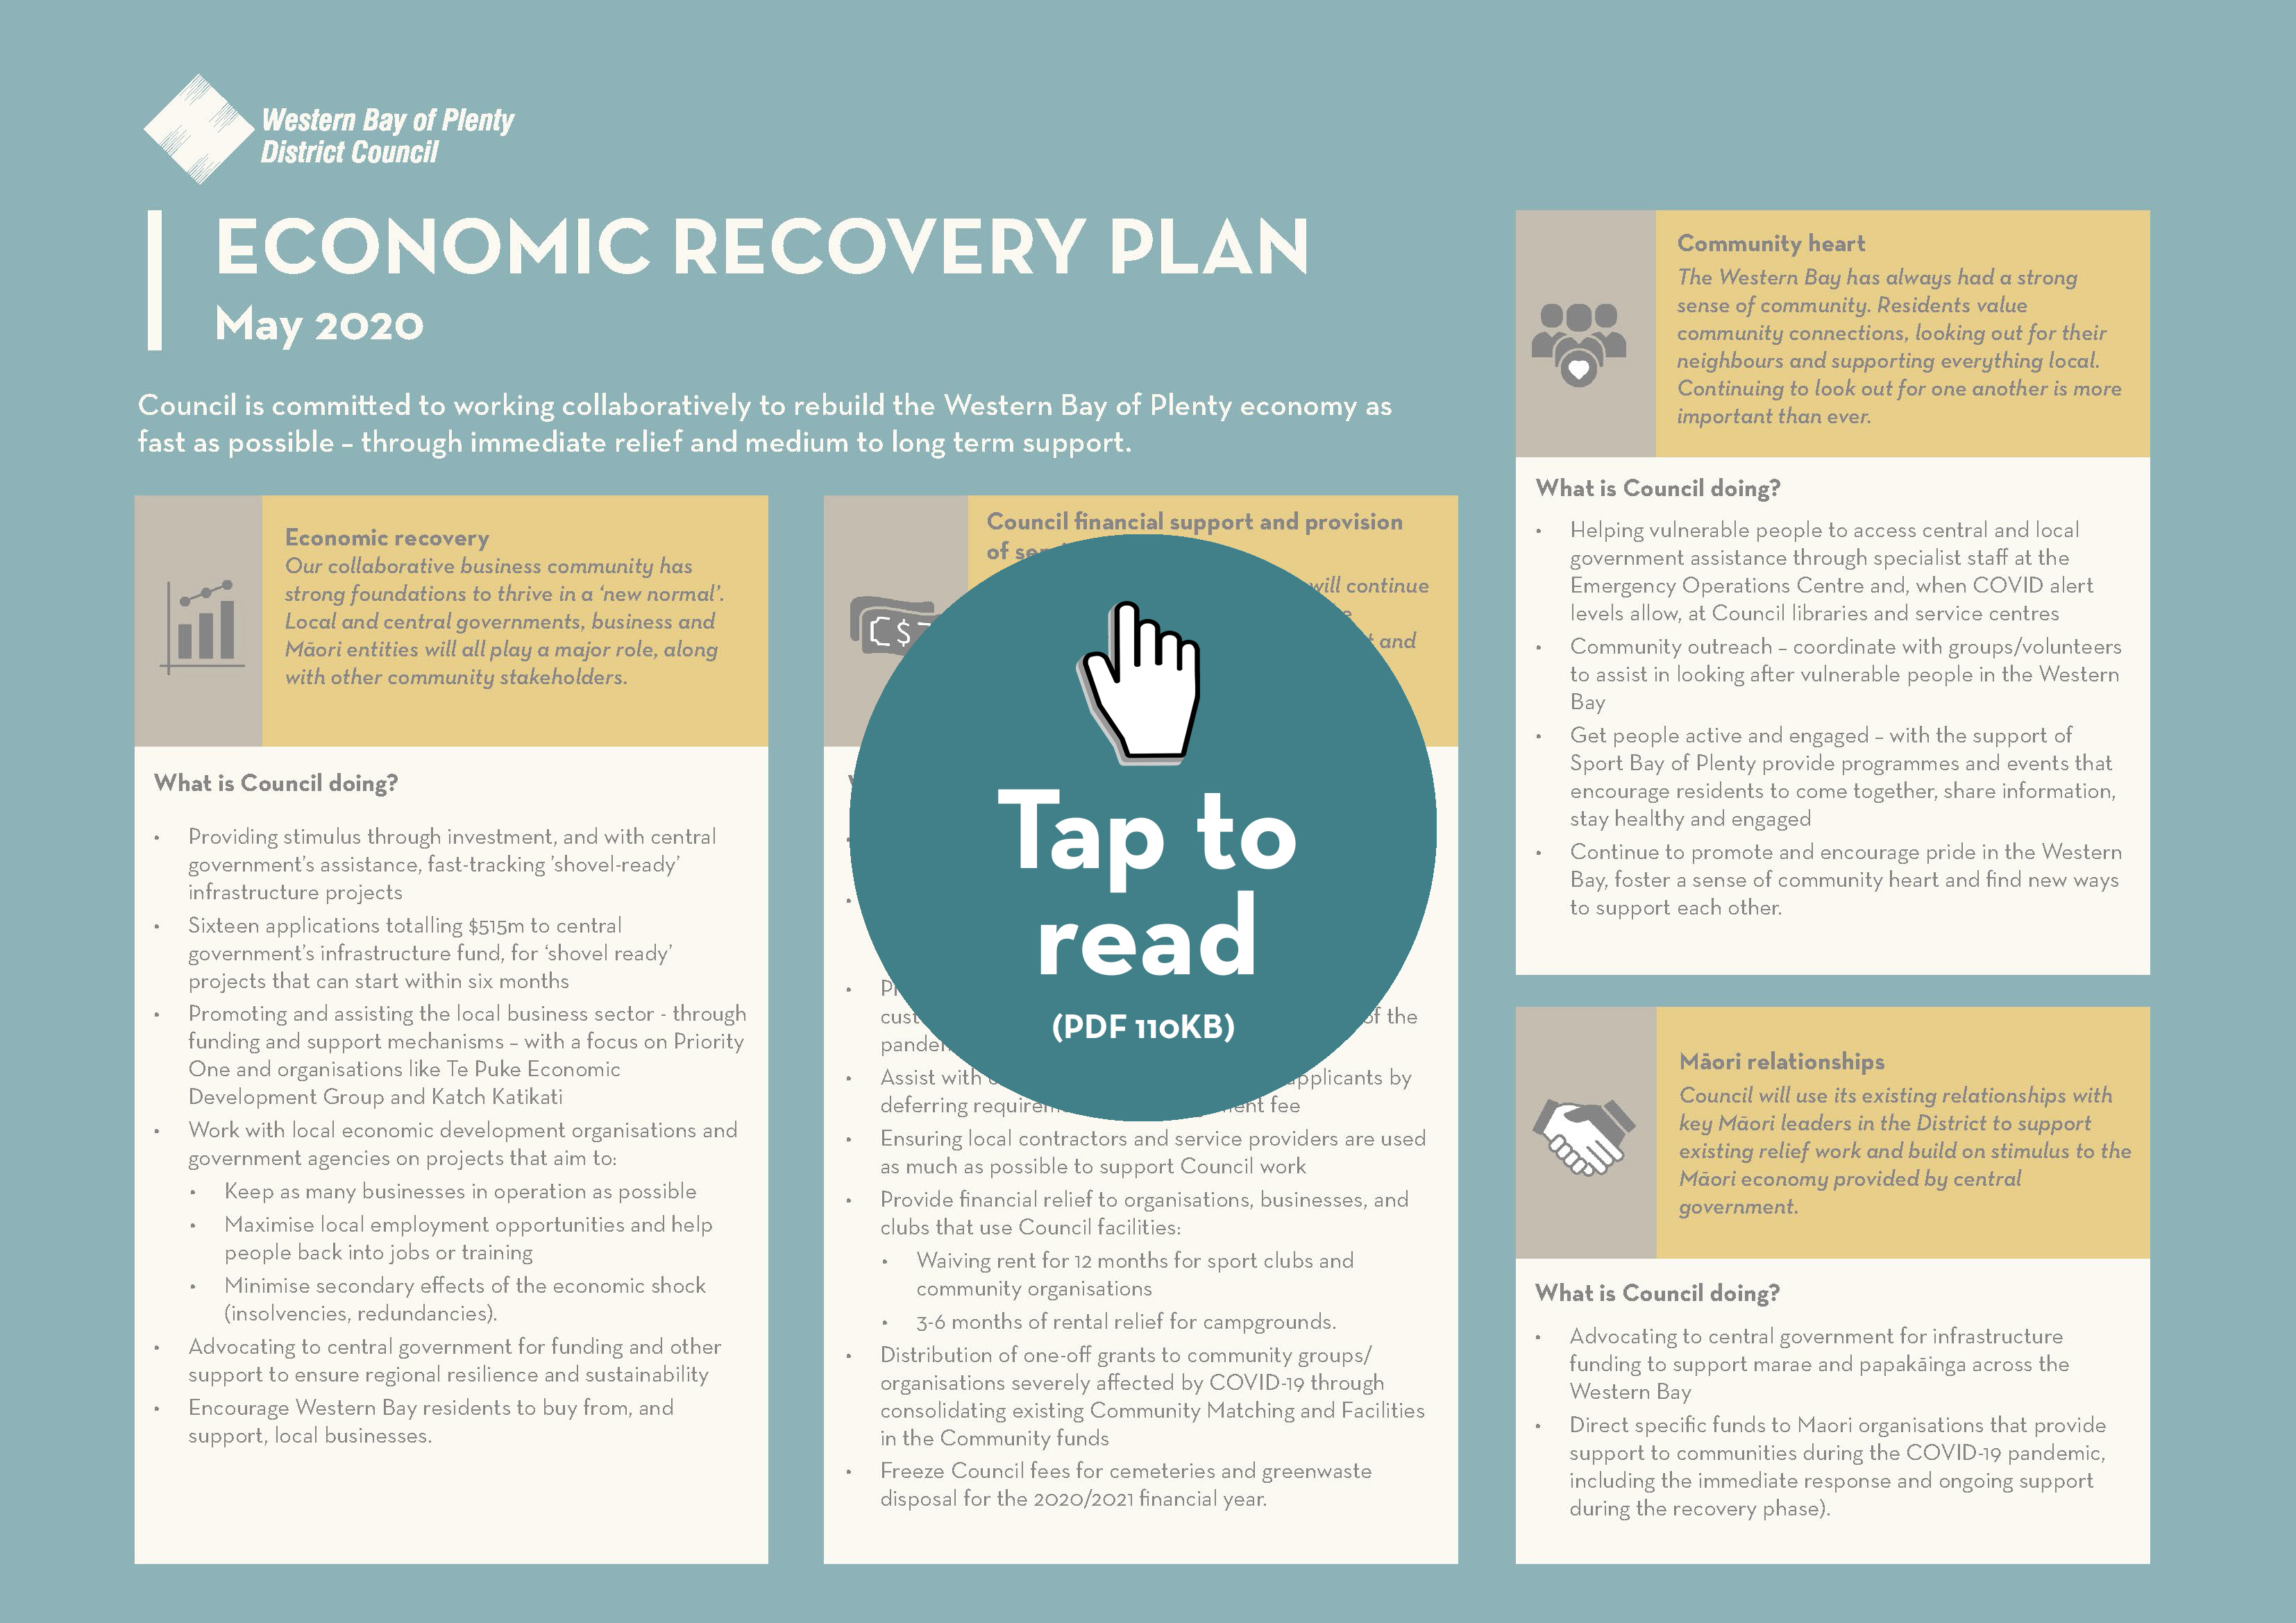 Economic recovery plan page 2 - tap to read